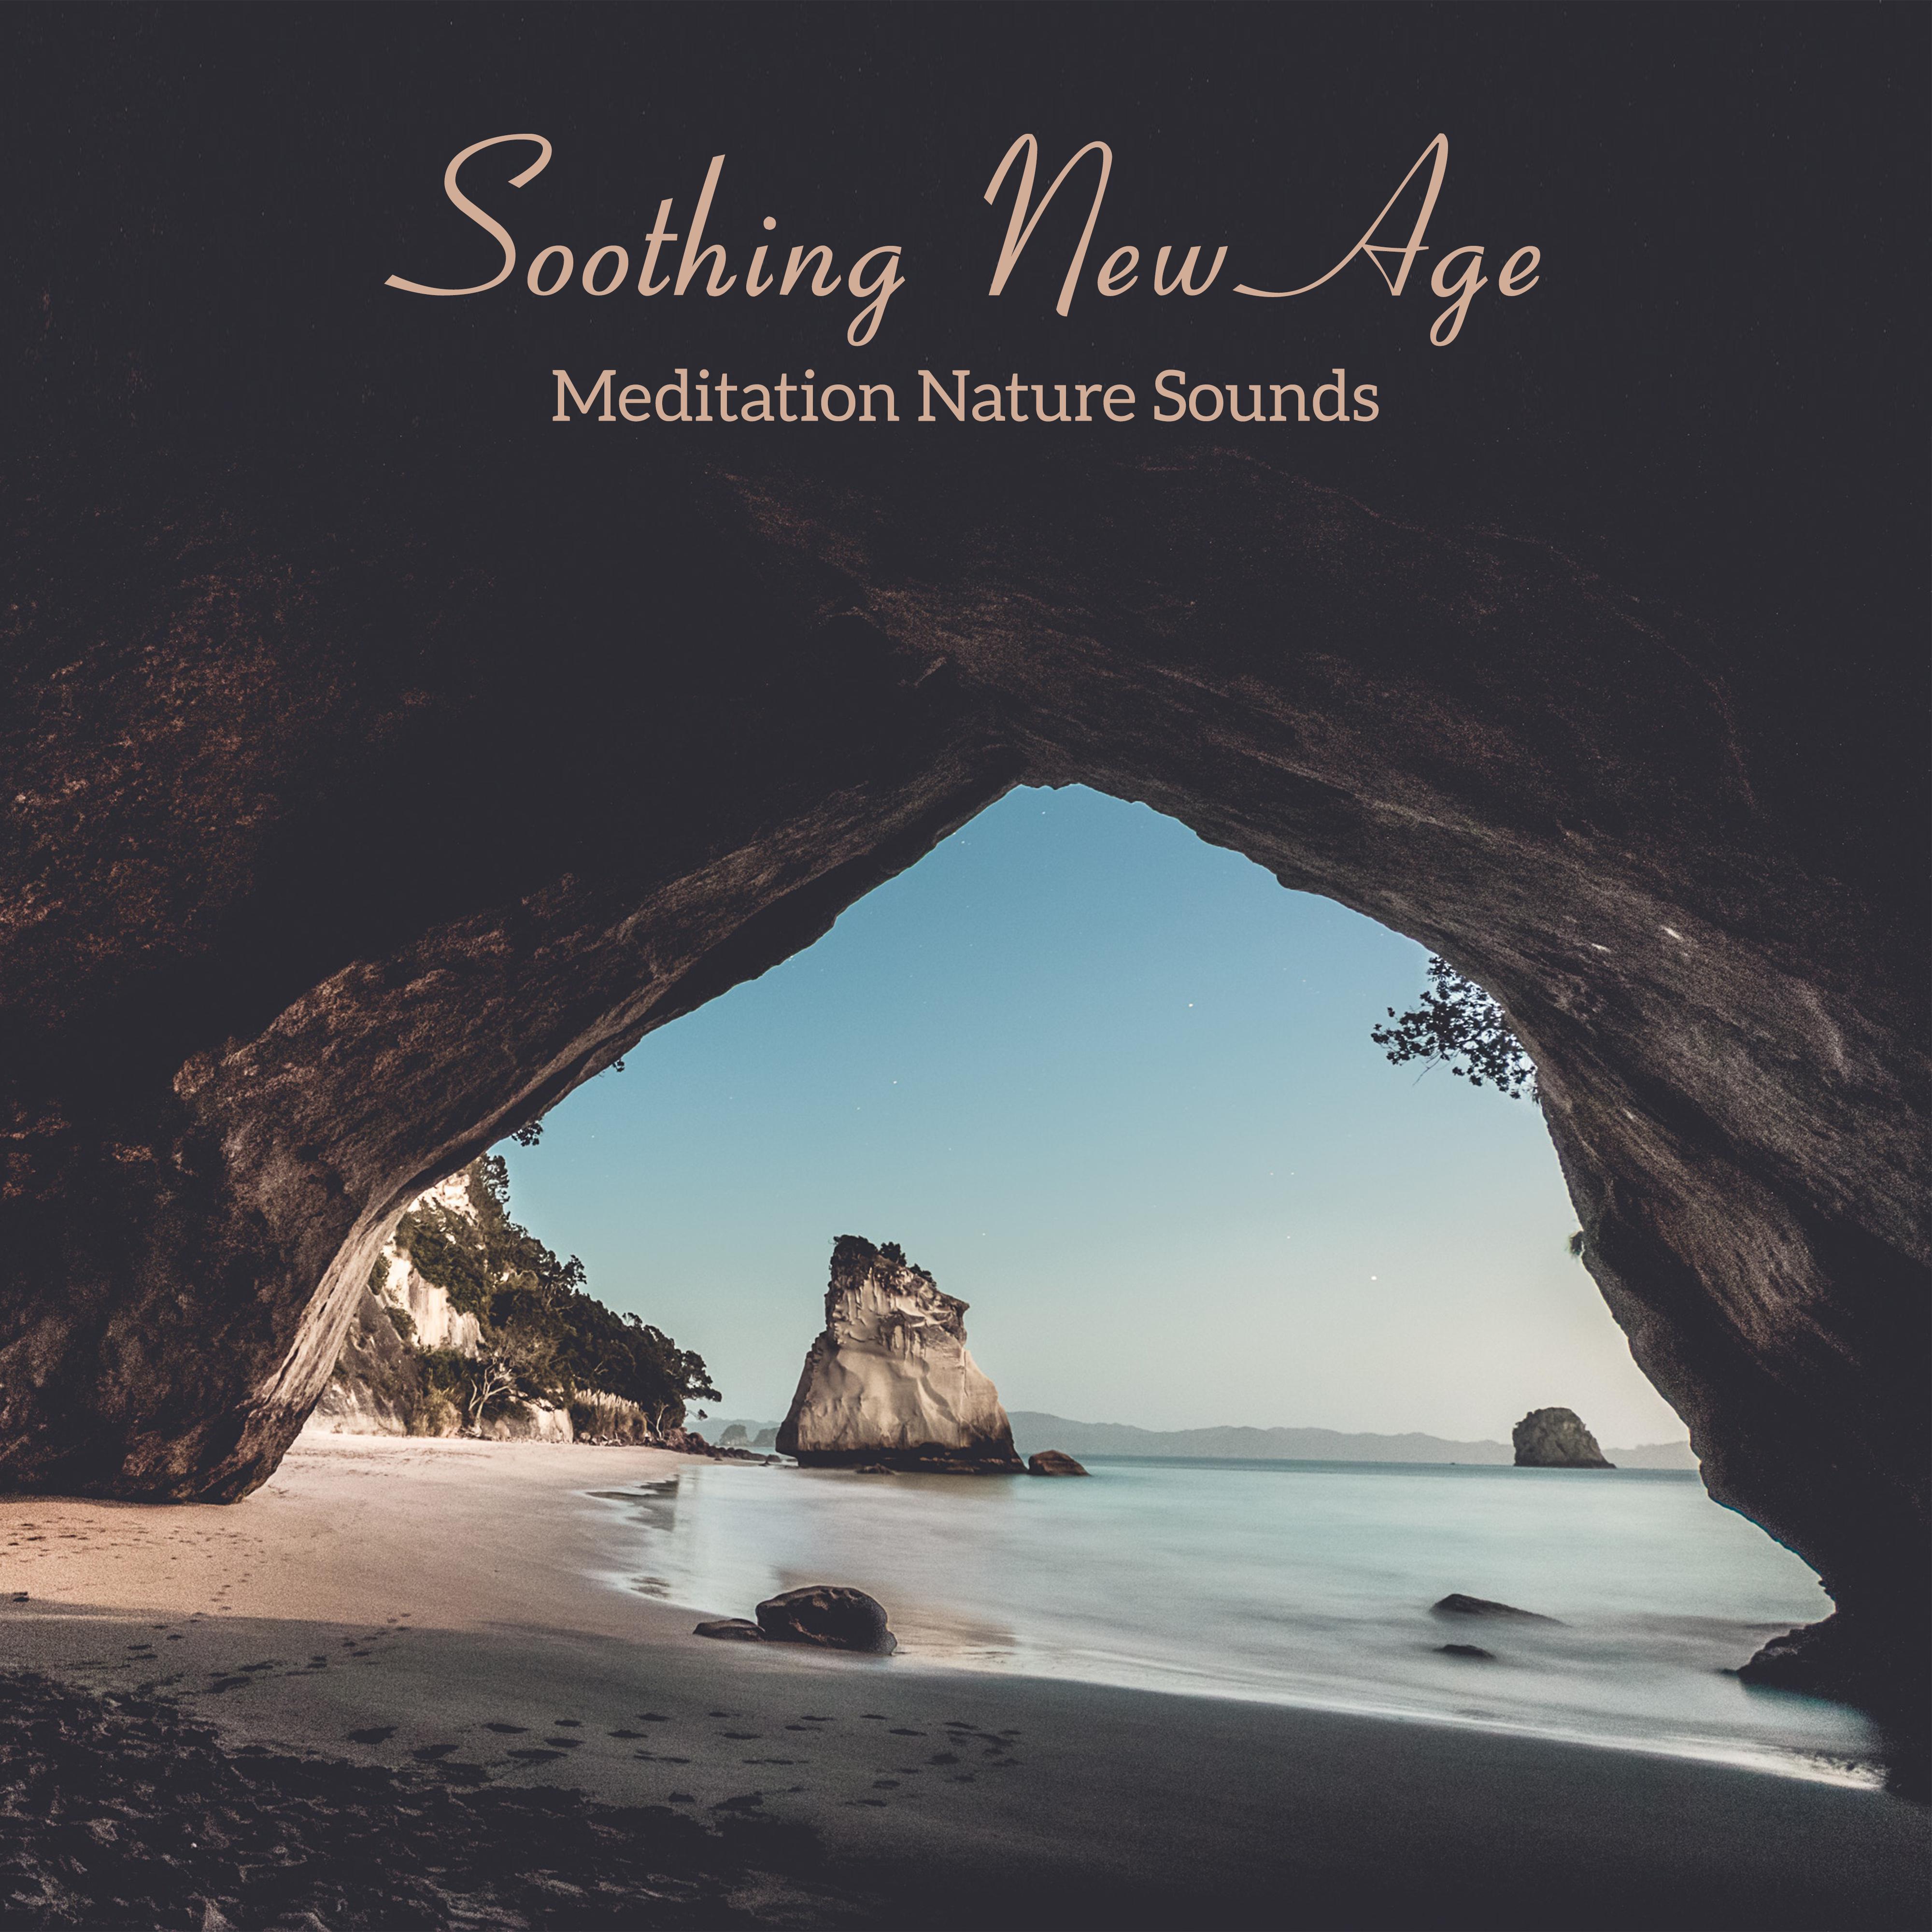 Soothing New Age Meditation Nature Sounds